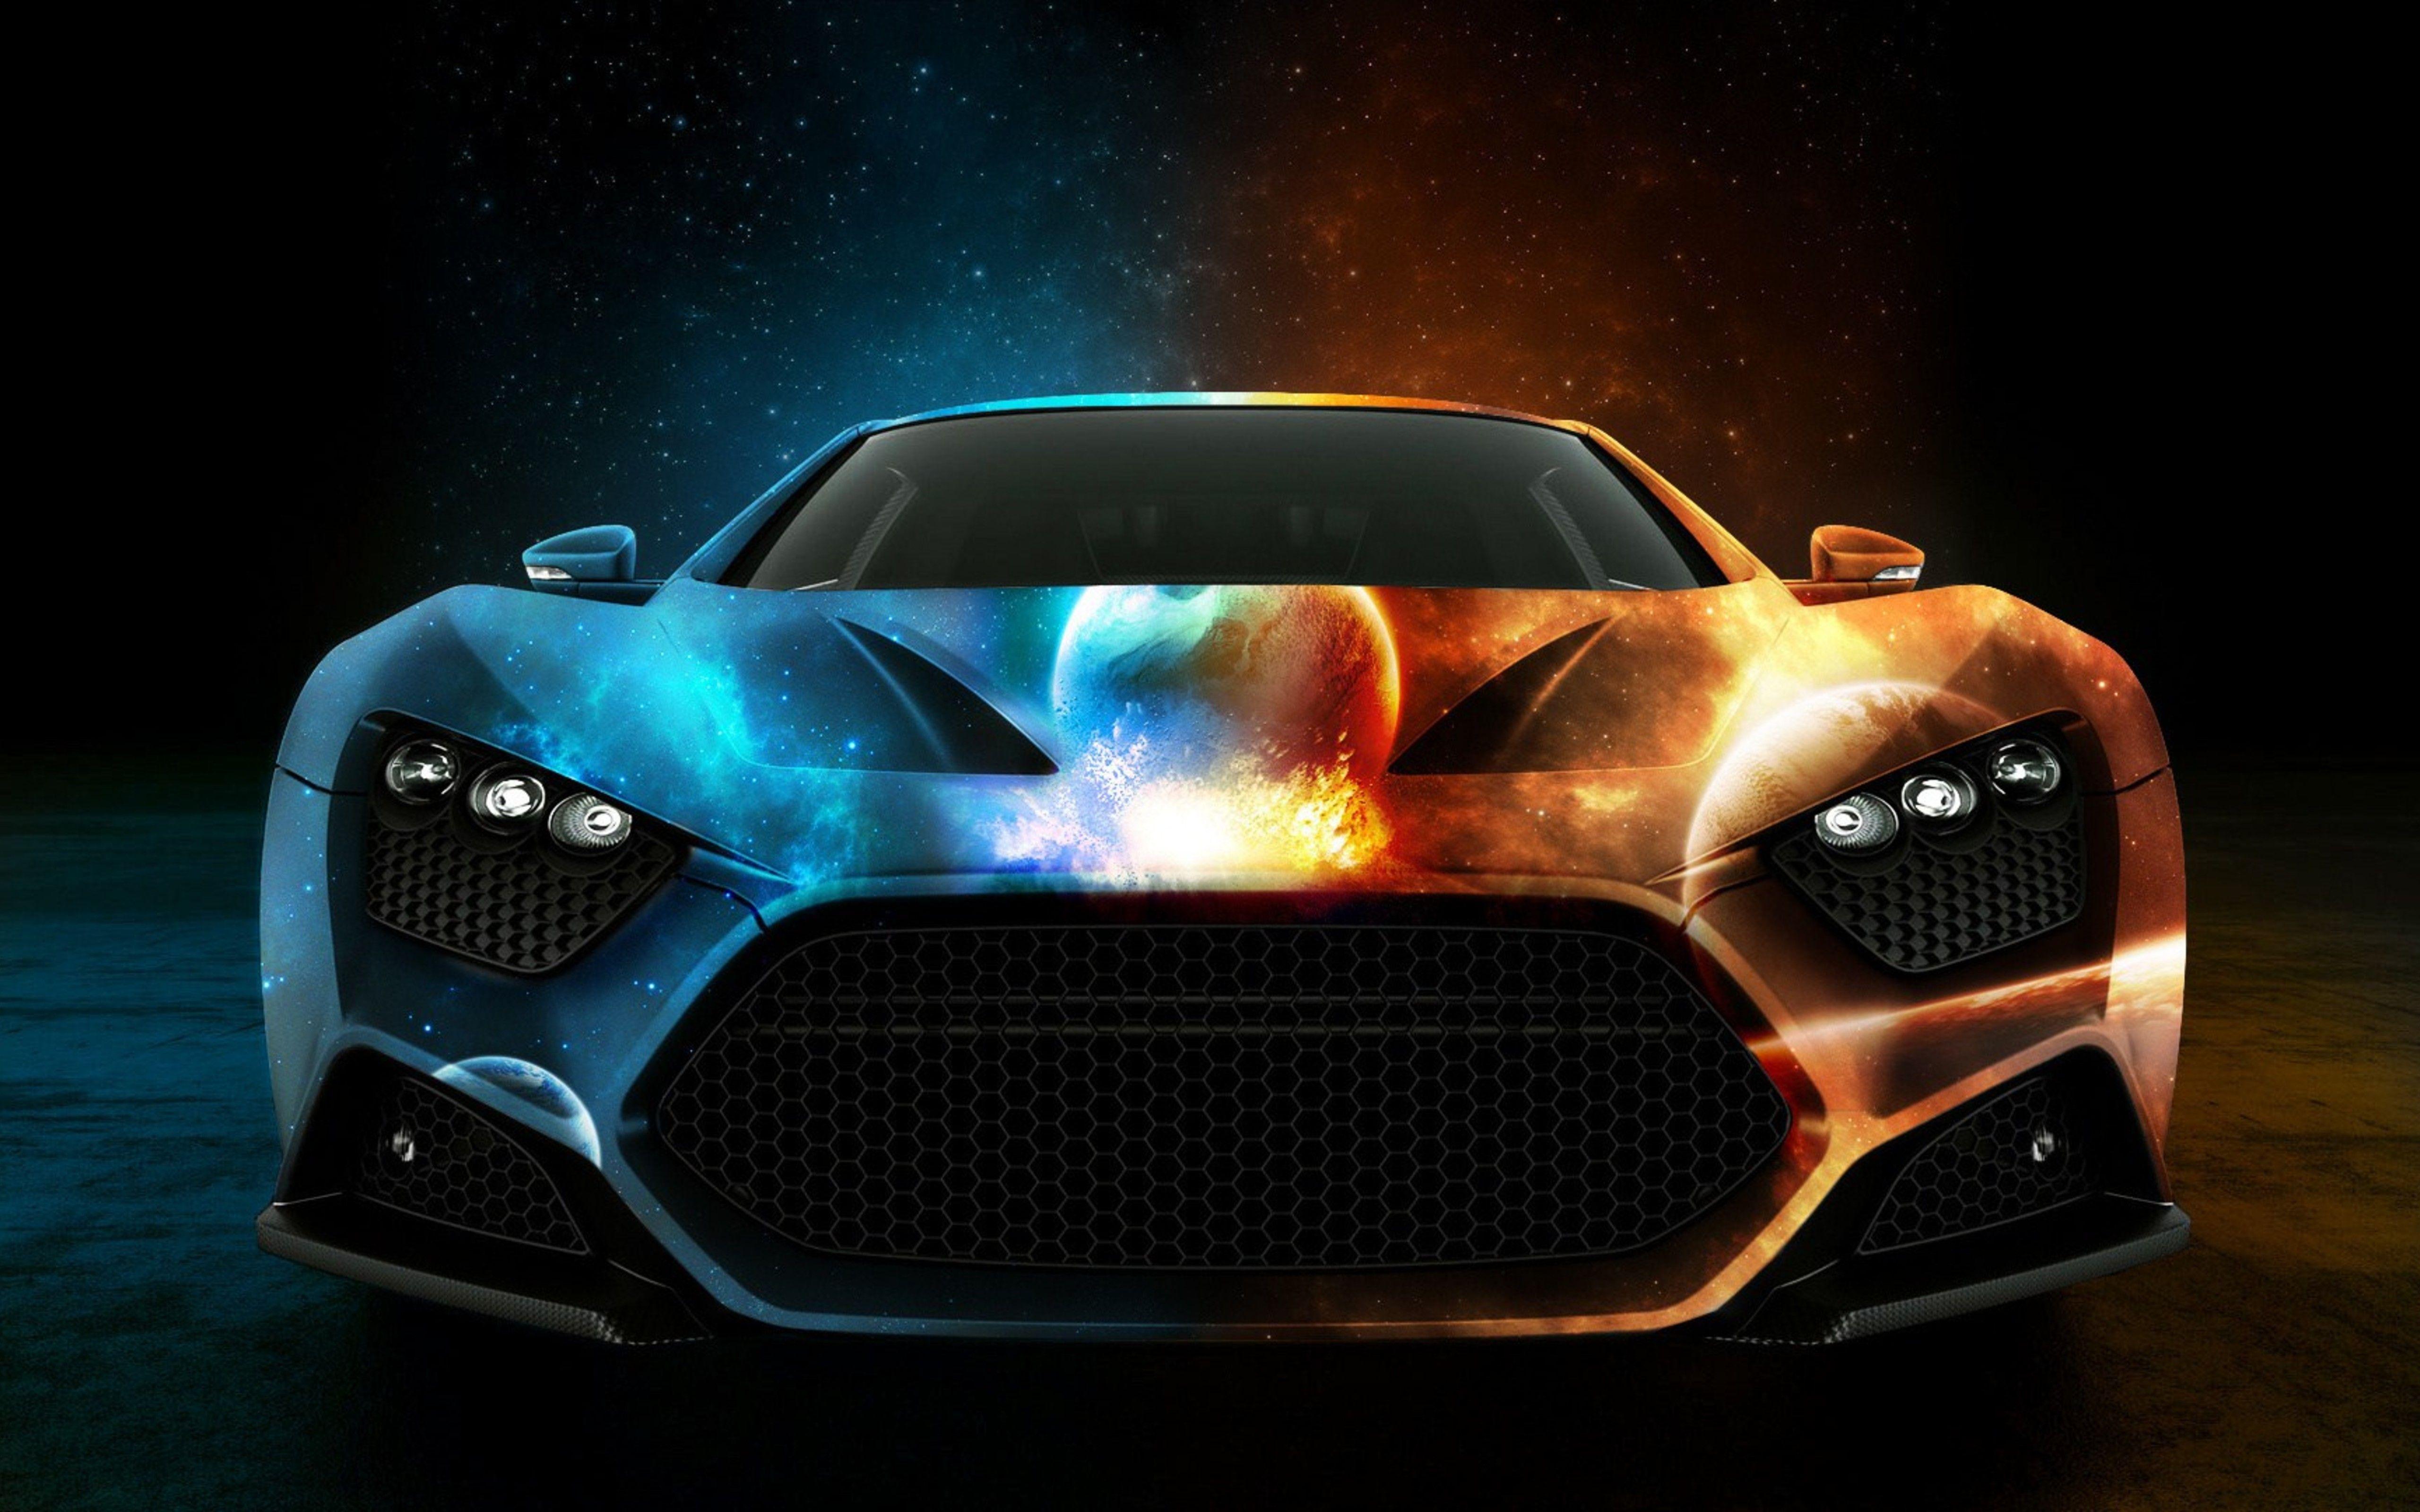 Water and fire abstract Car HD Wallpaper Free